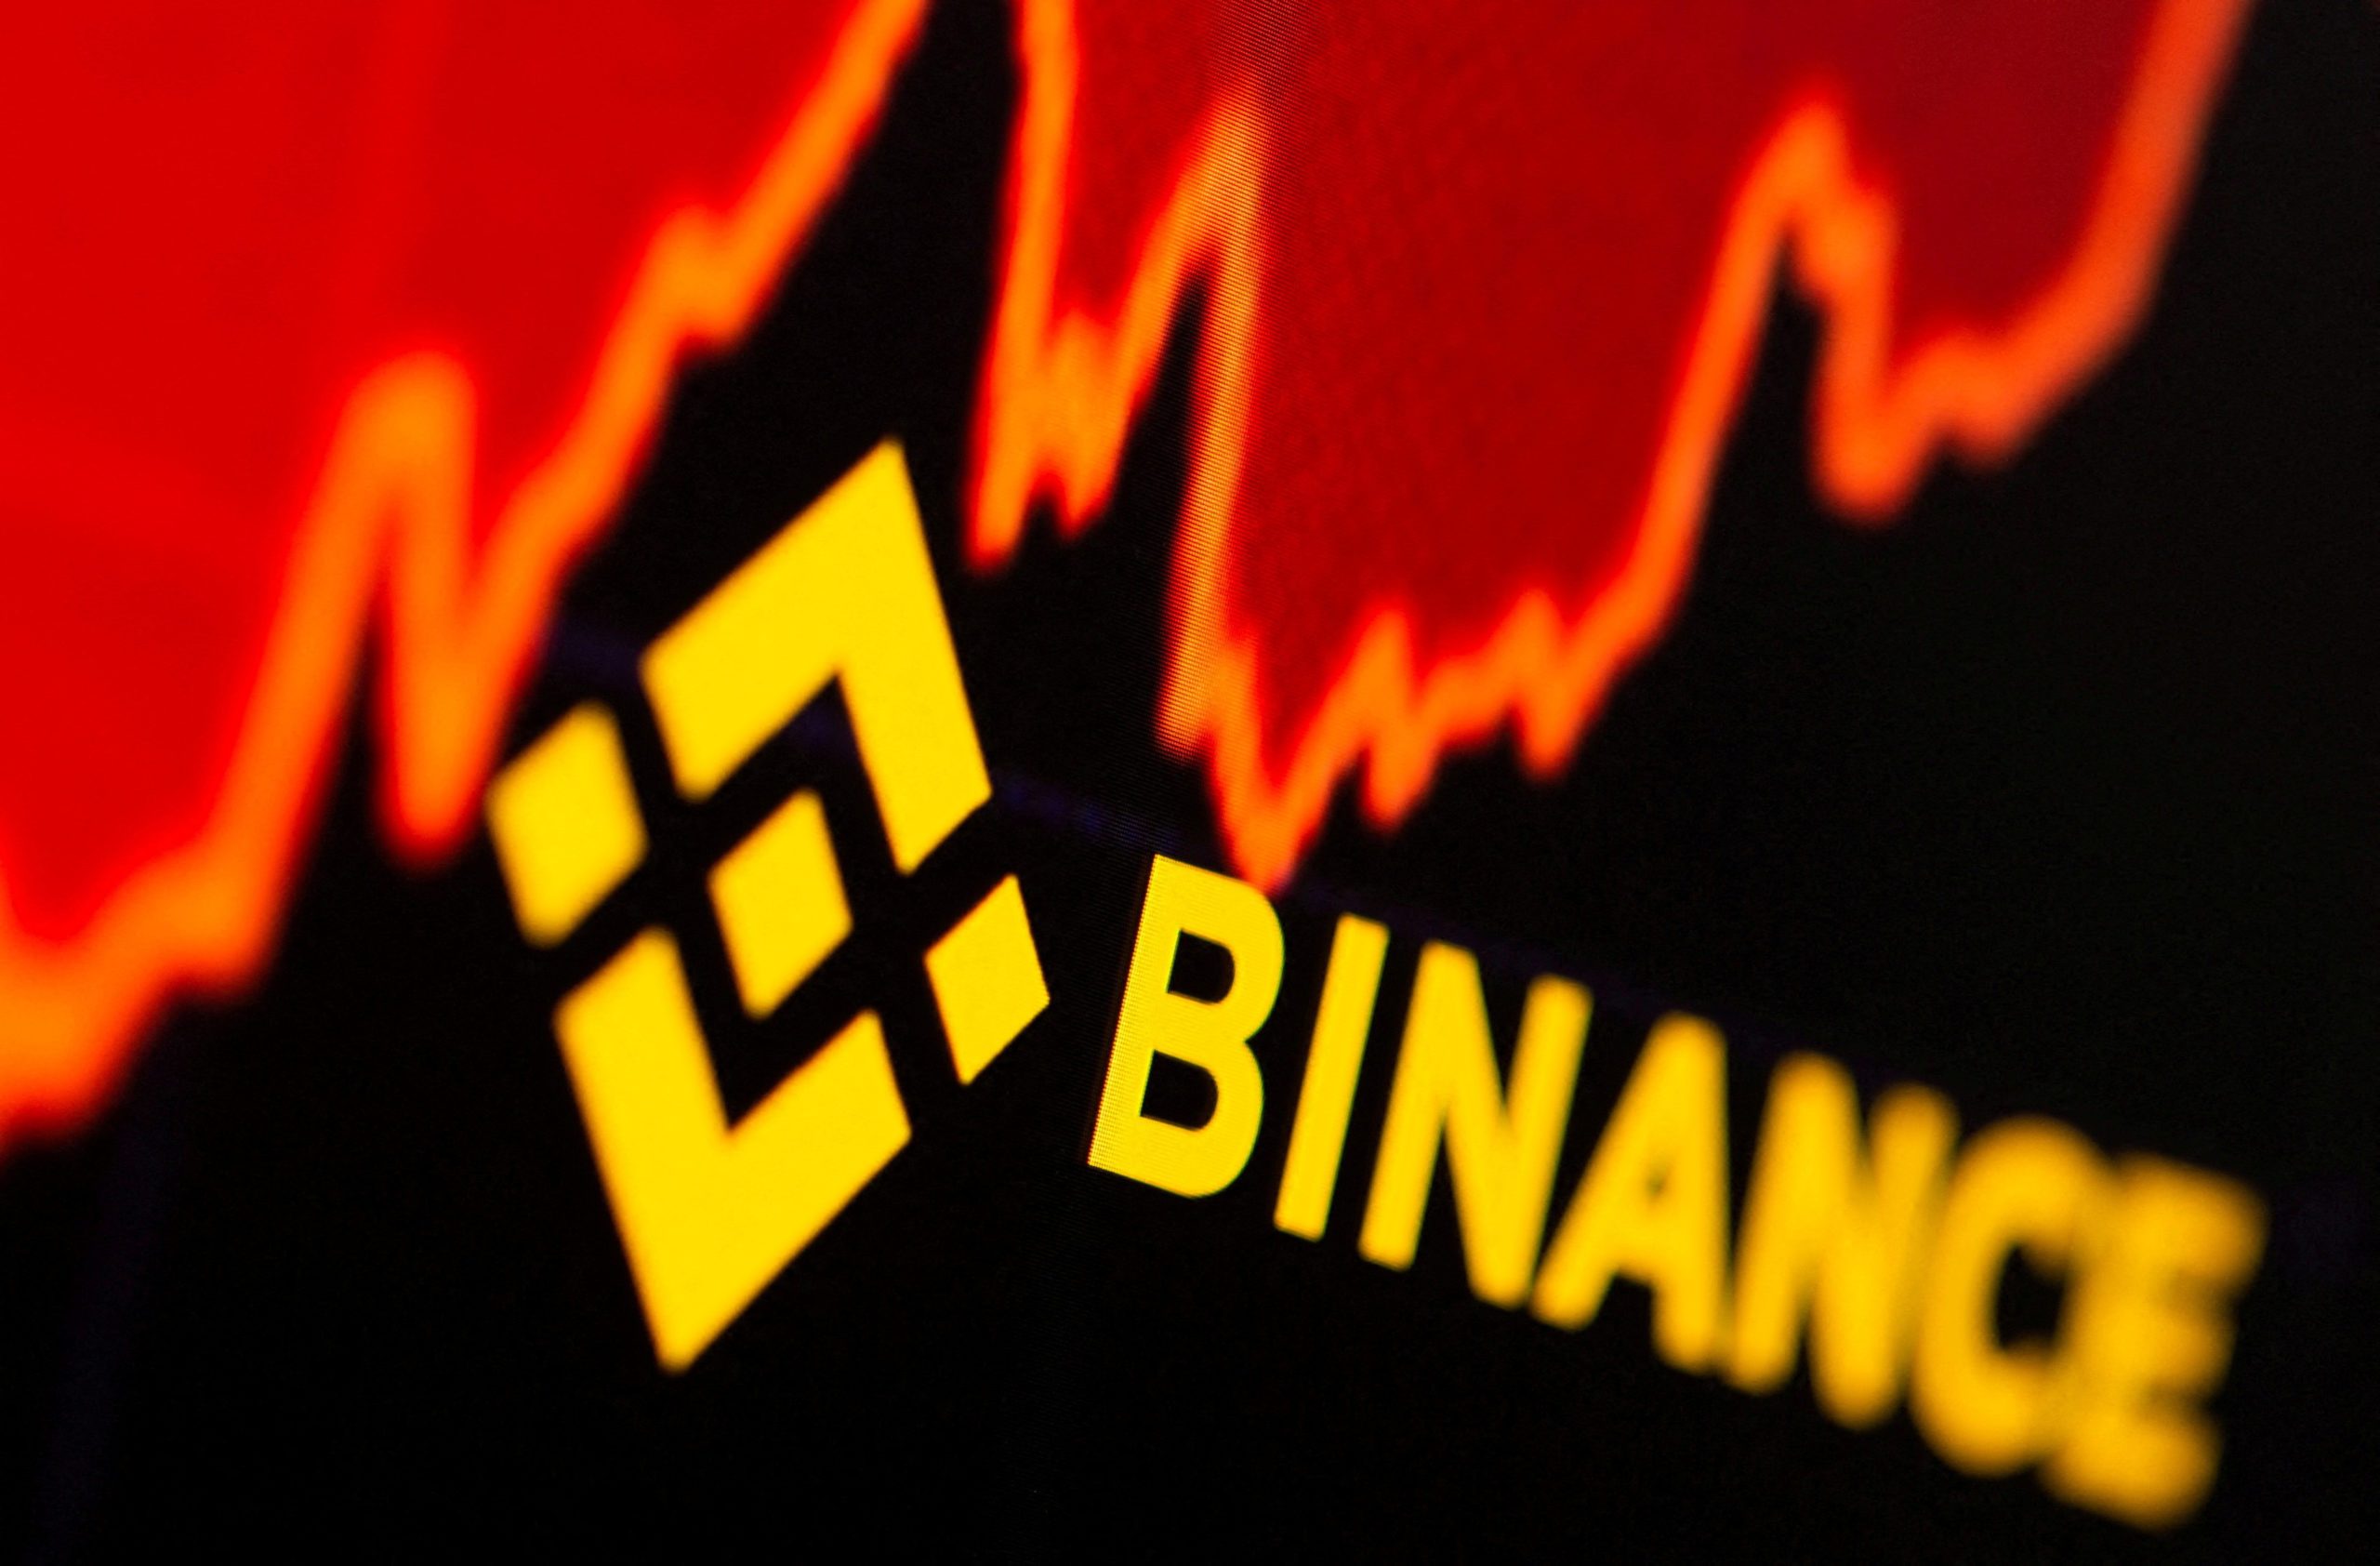 US SEC may take action against Binance stablecoin backer Paxos